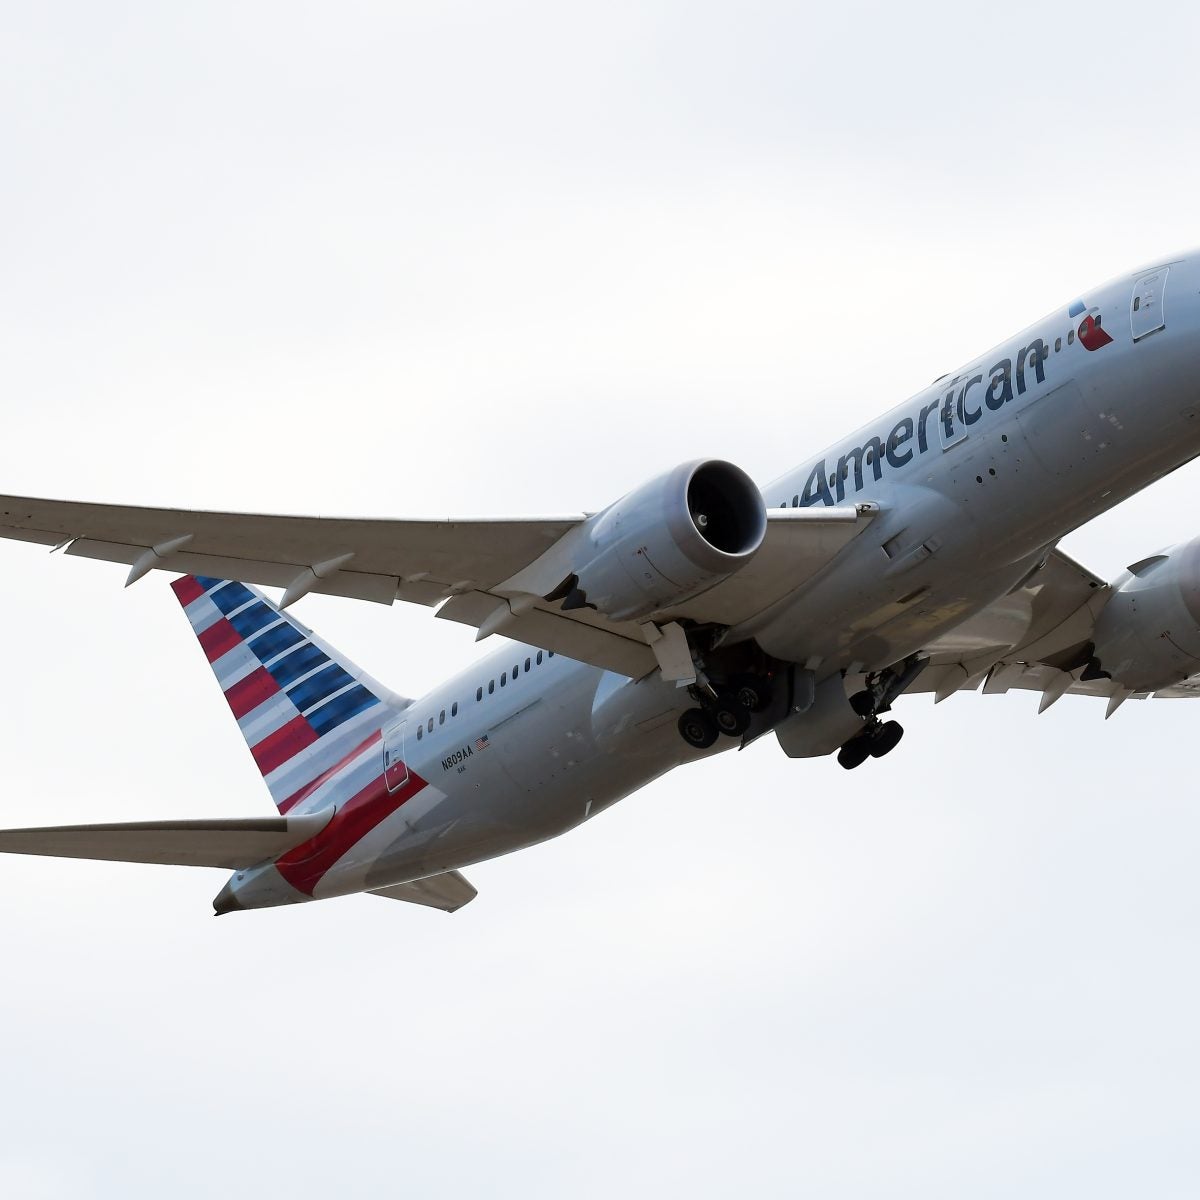 Black Couple Taking Legal Action After American Airlines Kicked Them Off Plane